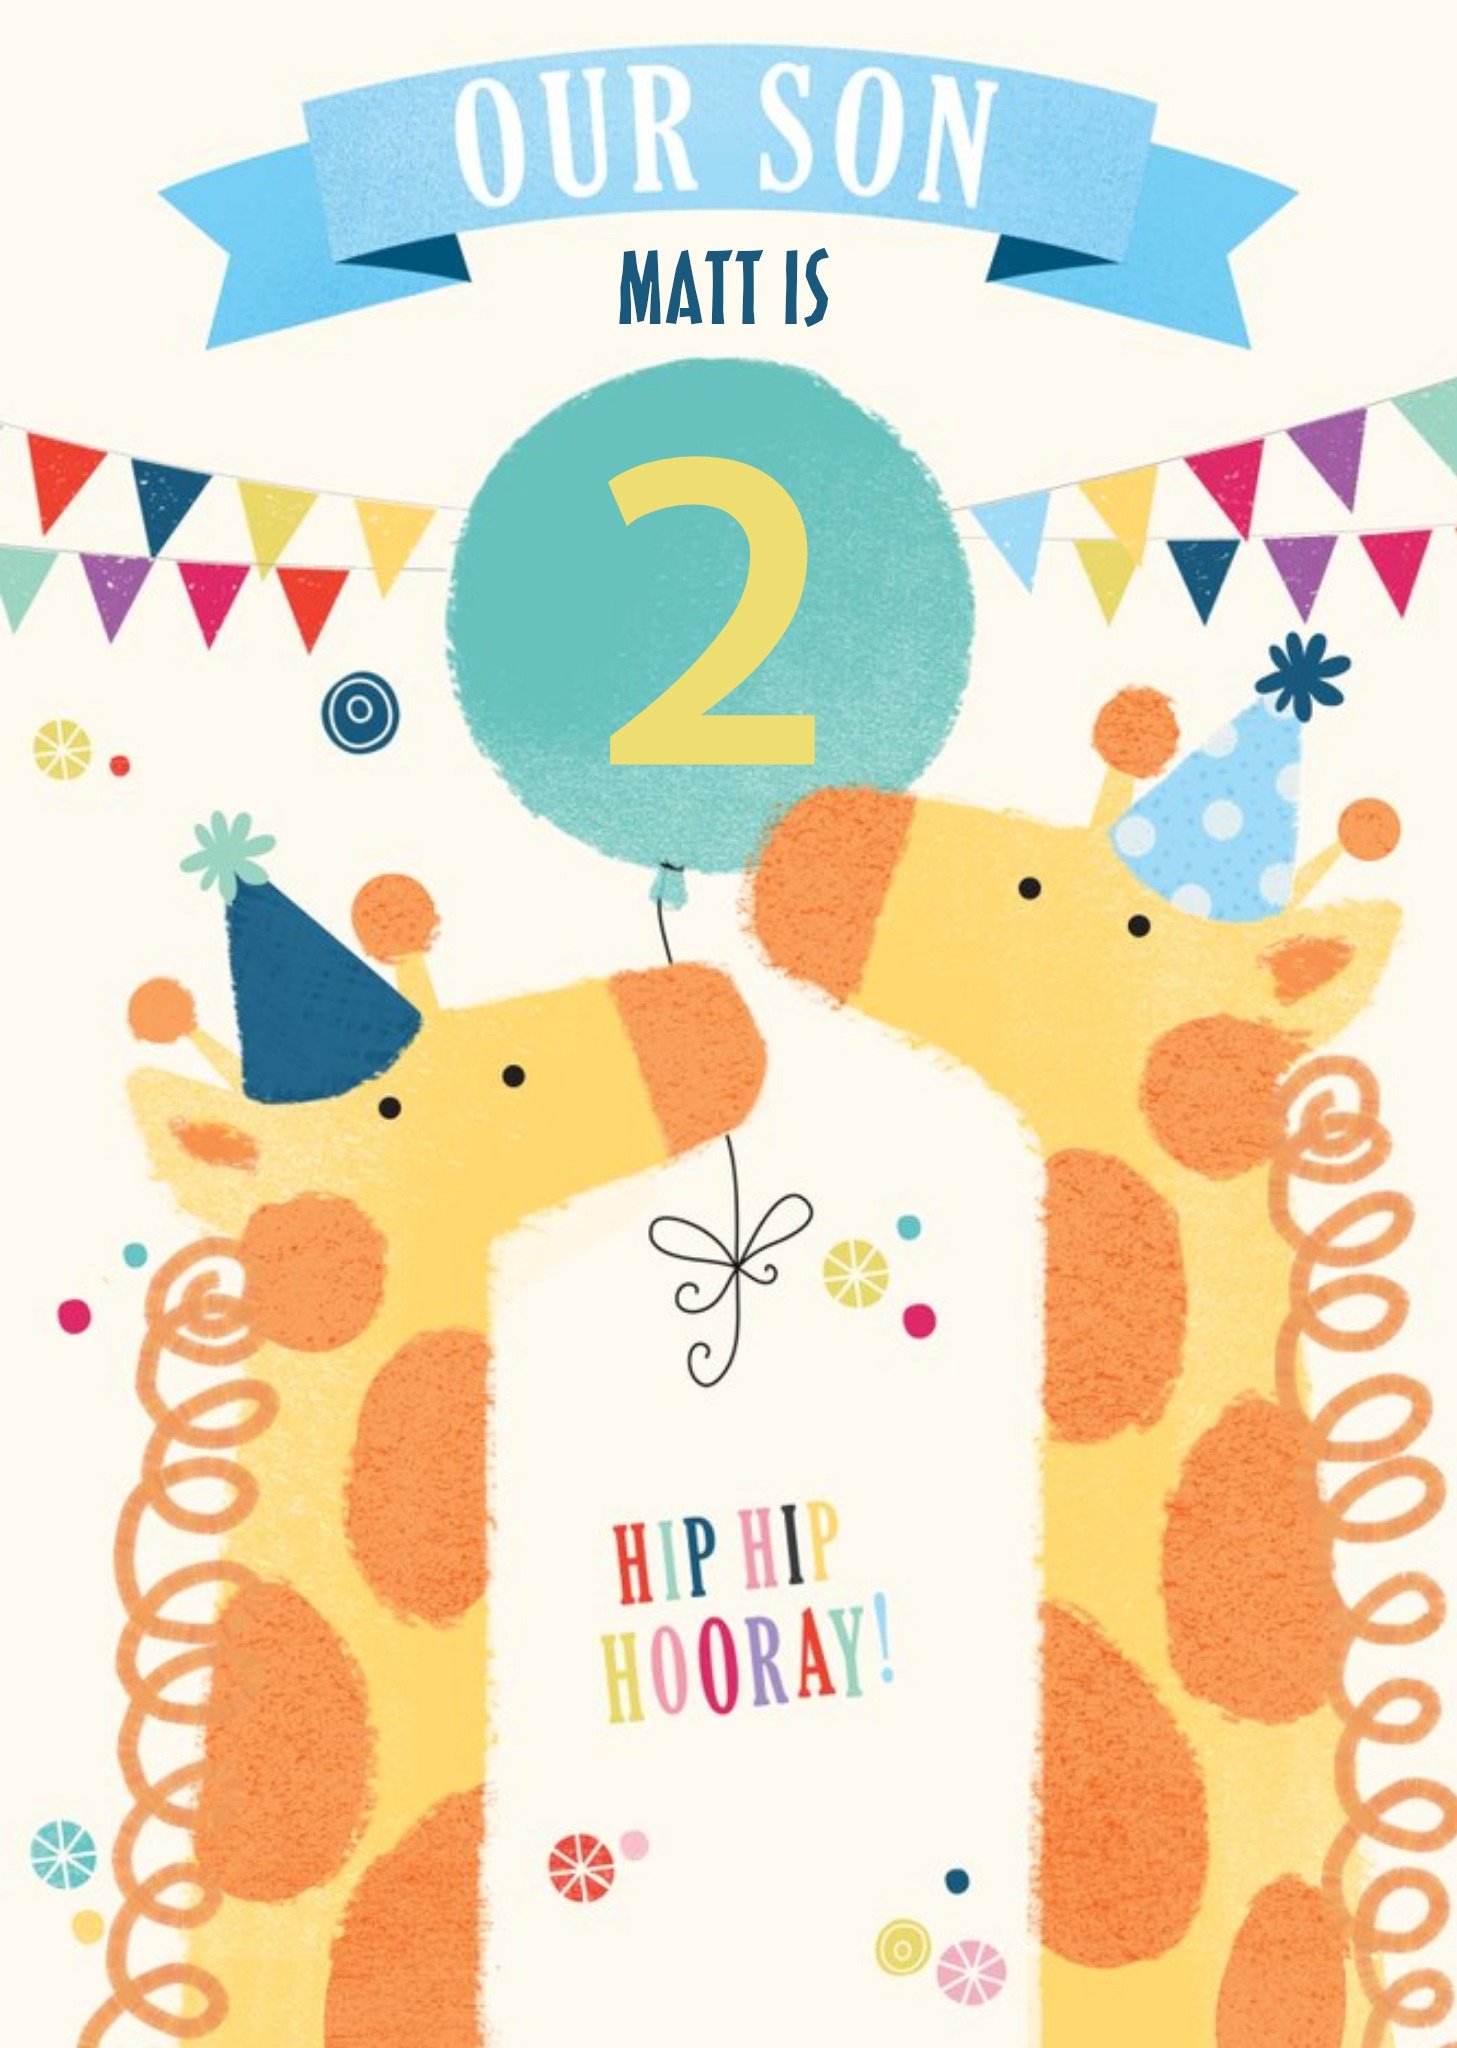 Moonpig Illustration Of Giraffes In Party Hats With A Balloon And Buntings Son's Birthday Card, Larg